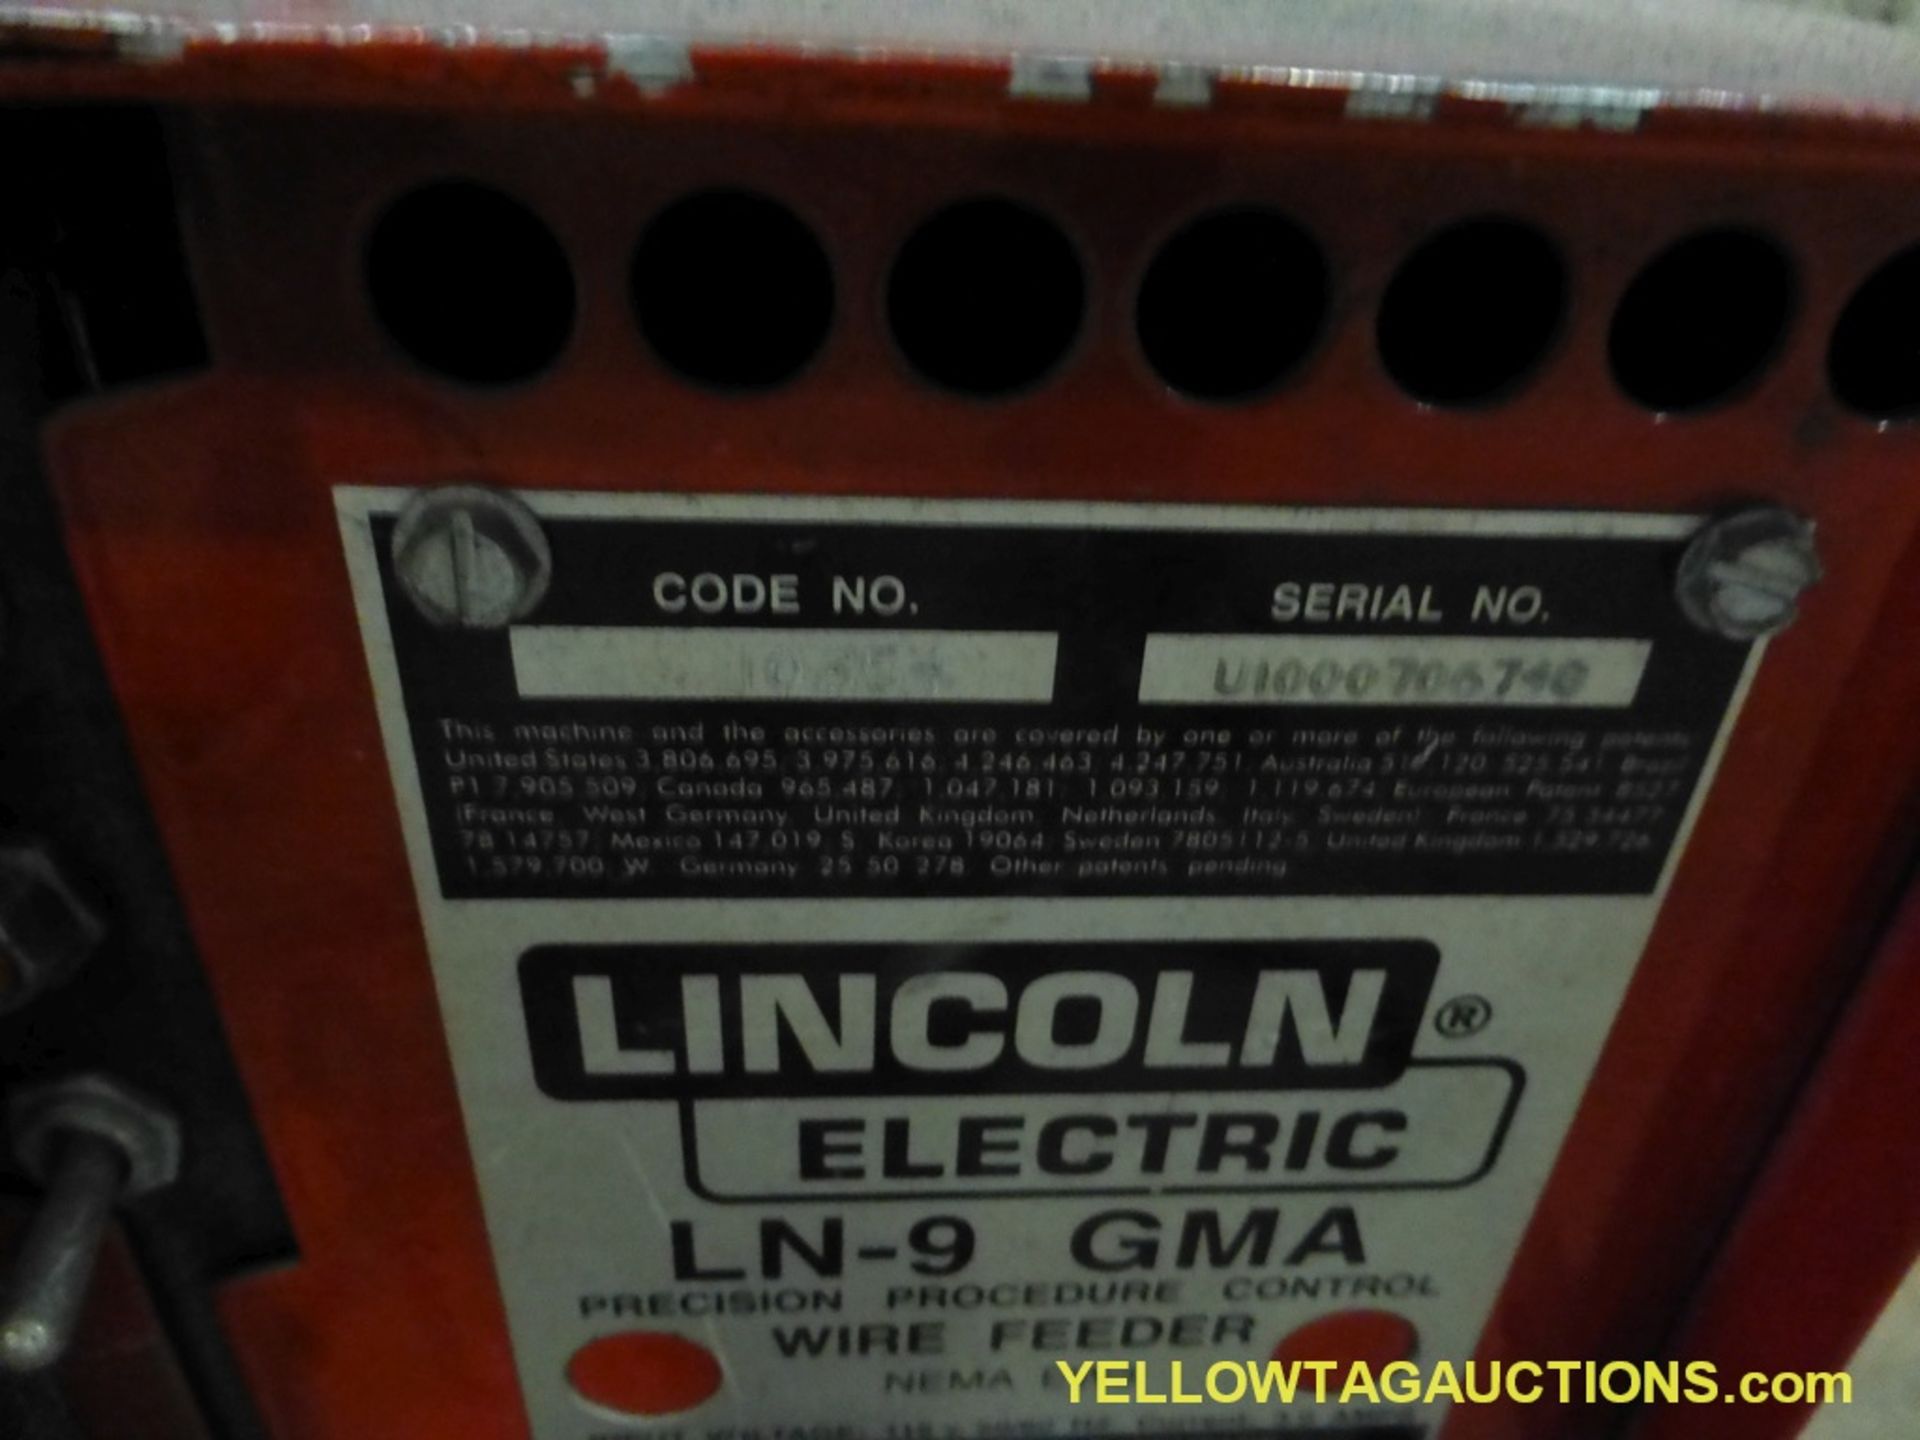 Lot of (2) Lincoln Components | (1) Ideal Arc DC 600 Welder; (1) Electric LN-9 GMA Wire Feeder - Image 10 of 14